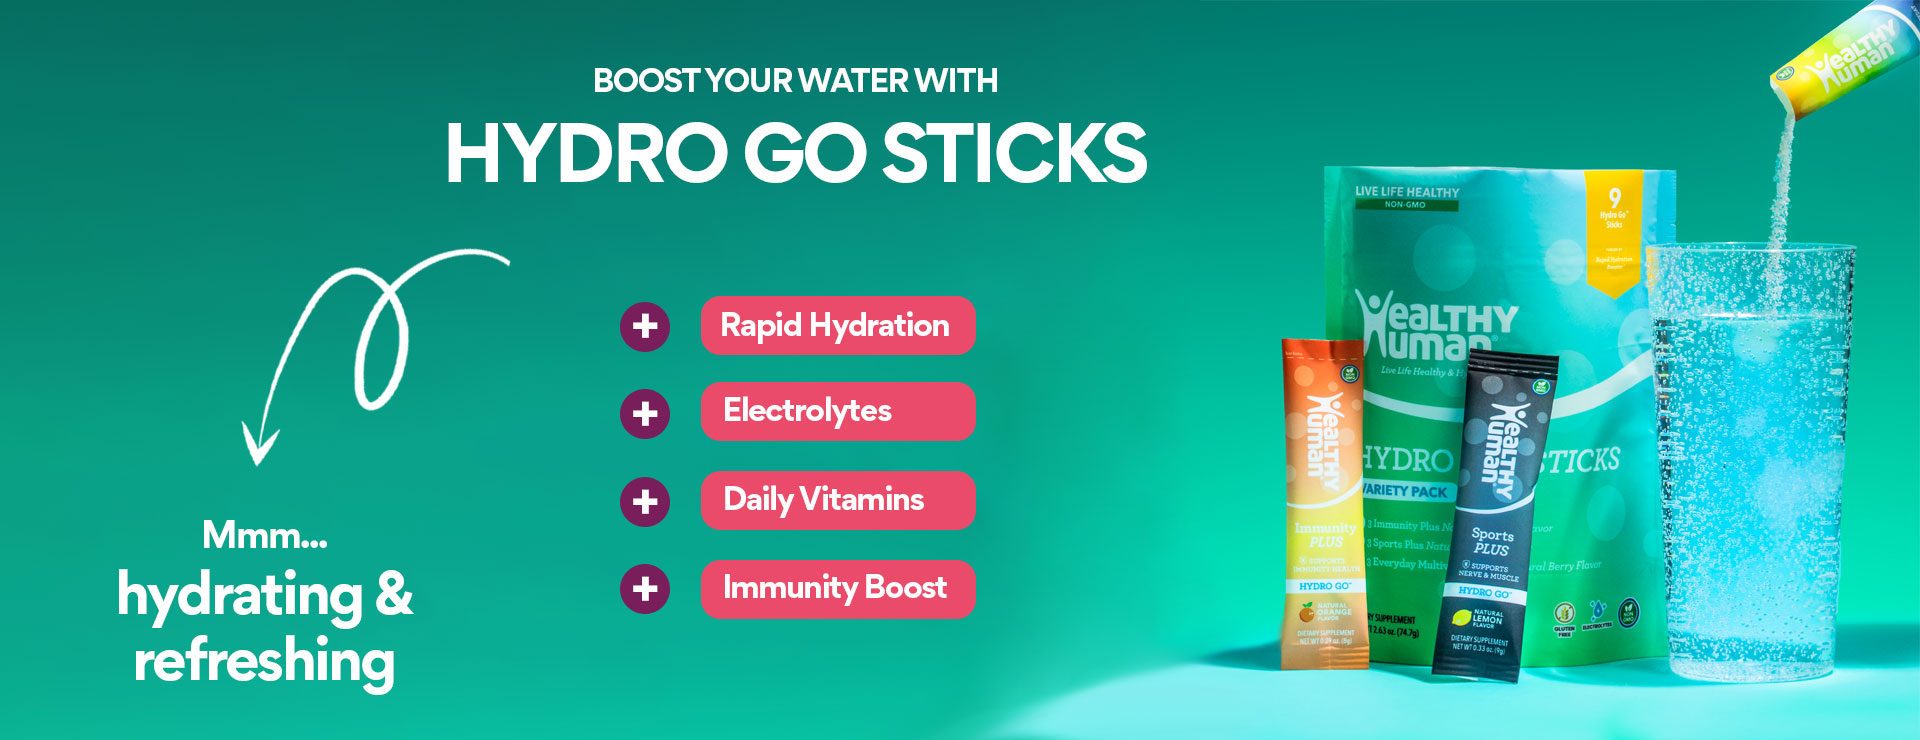 Boost your water with Hydrogo Sticks